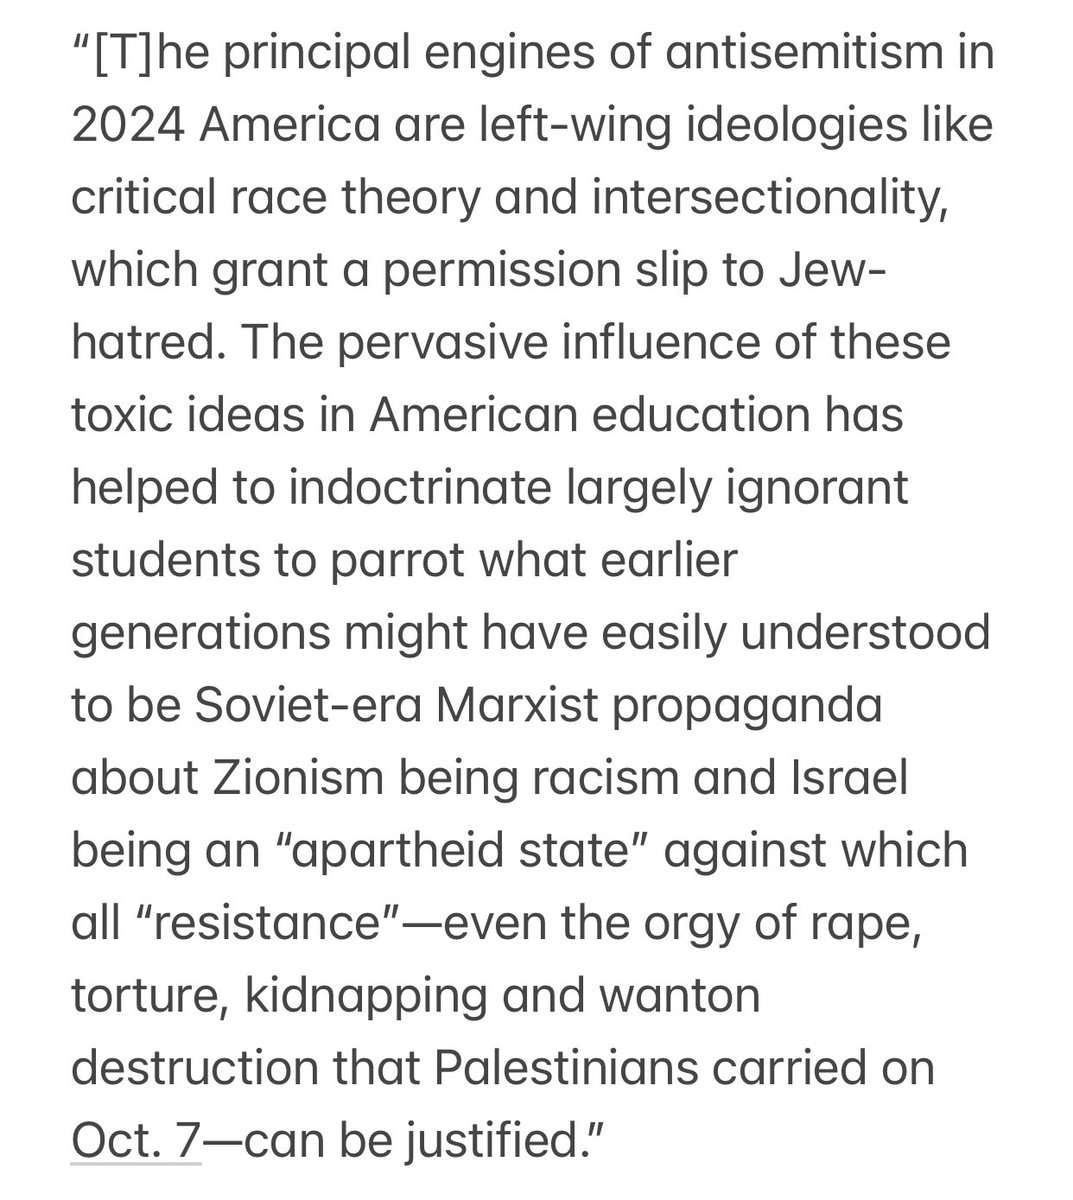 From a fine essay from ⁦@jonathans_tobin⁩ on liberal media and its blindness to the eruption of anti-Semitism in America on a scale not imaginable post 1945: jns.org/liberal-media-…